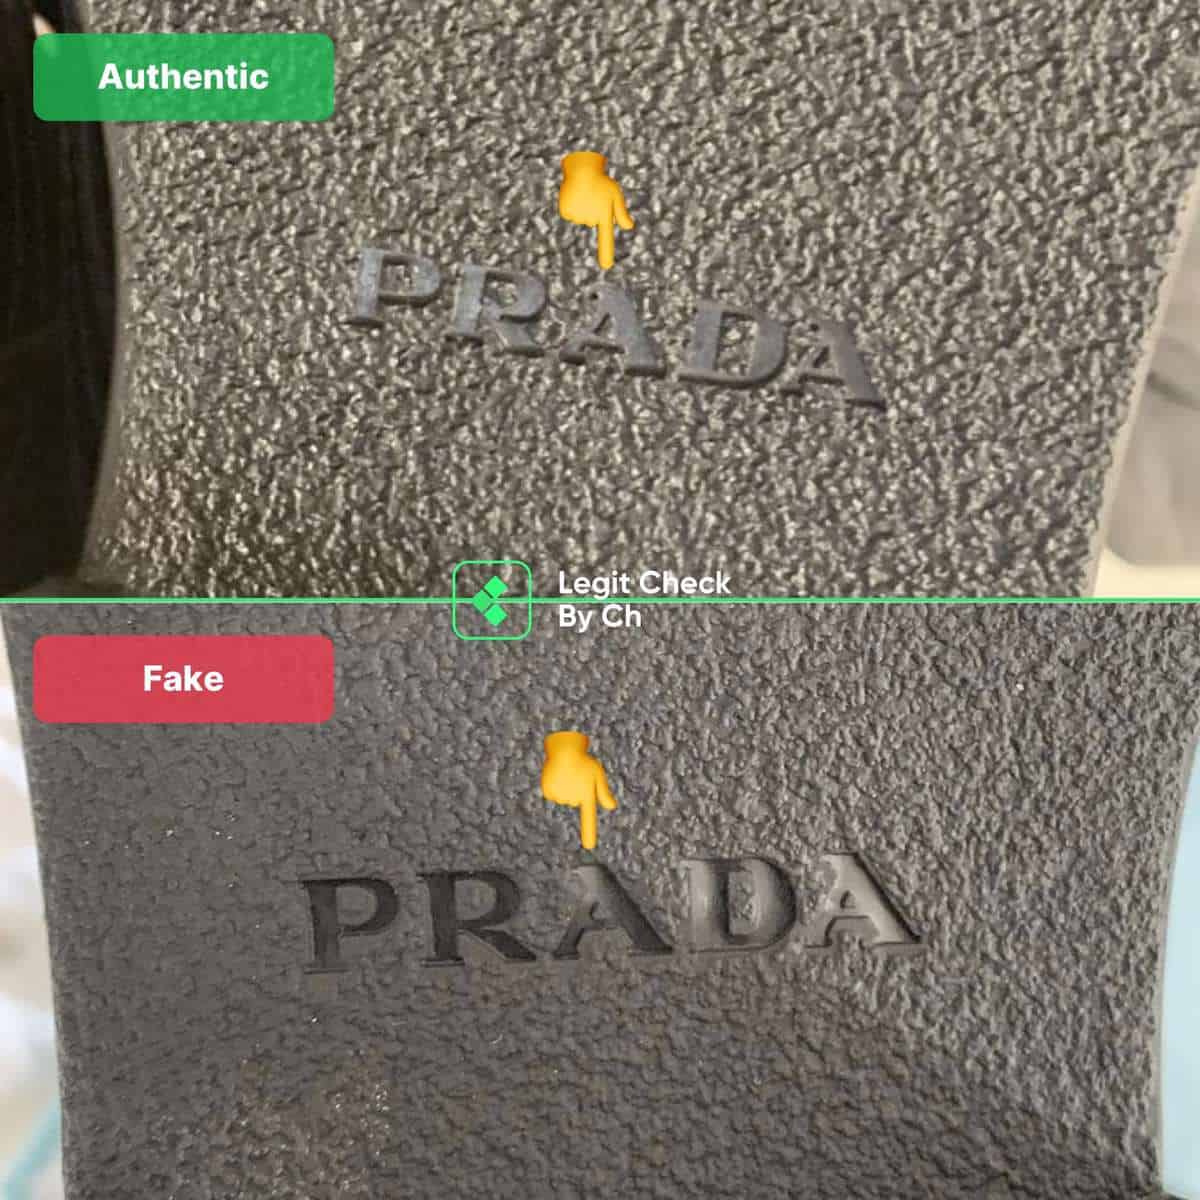 How To Spot Fake Prada Monolith Boots - Legit Check By Ch